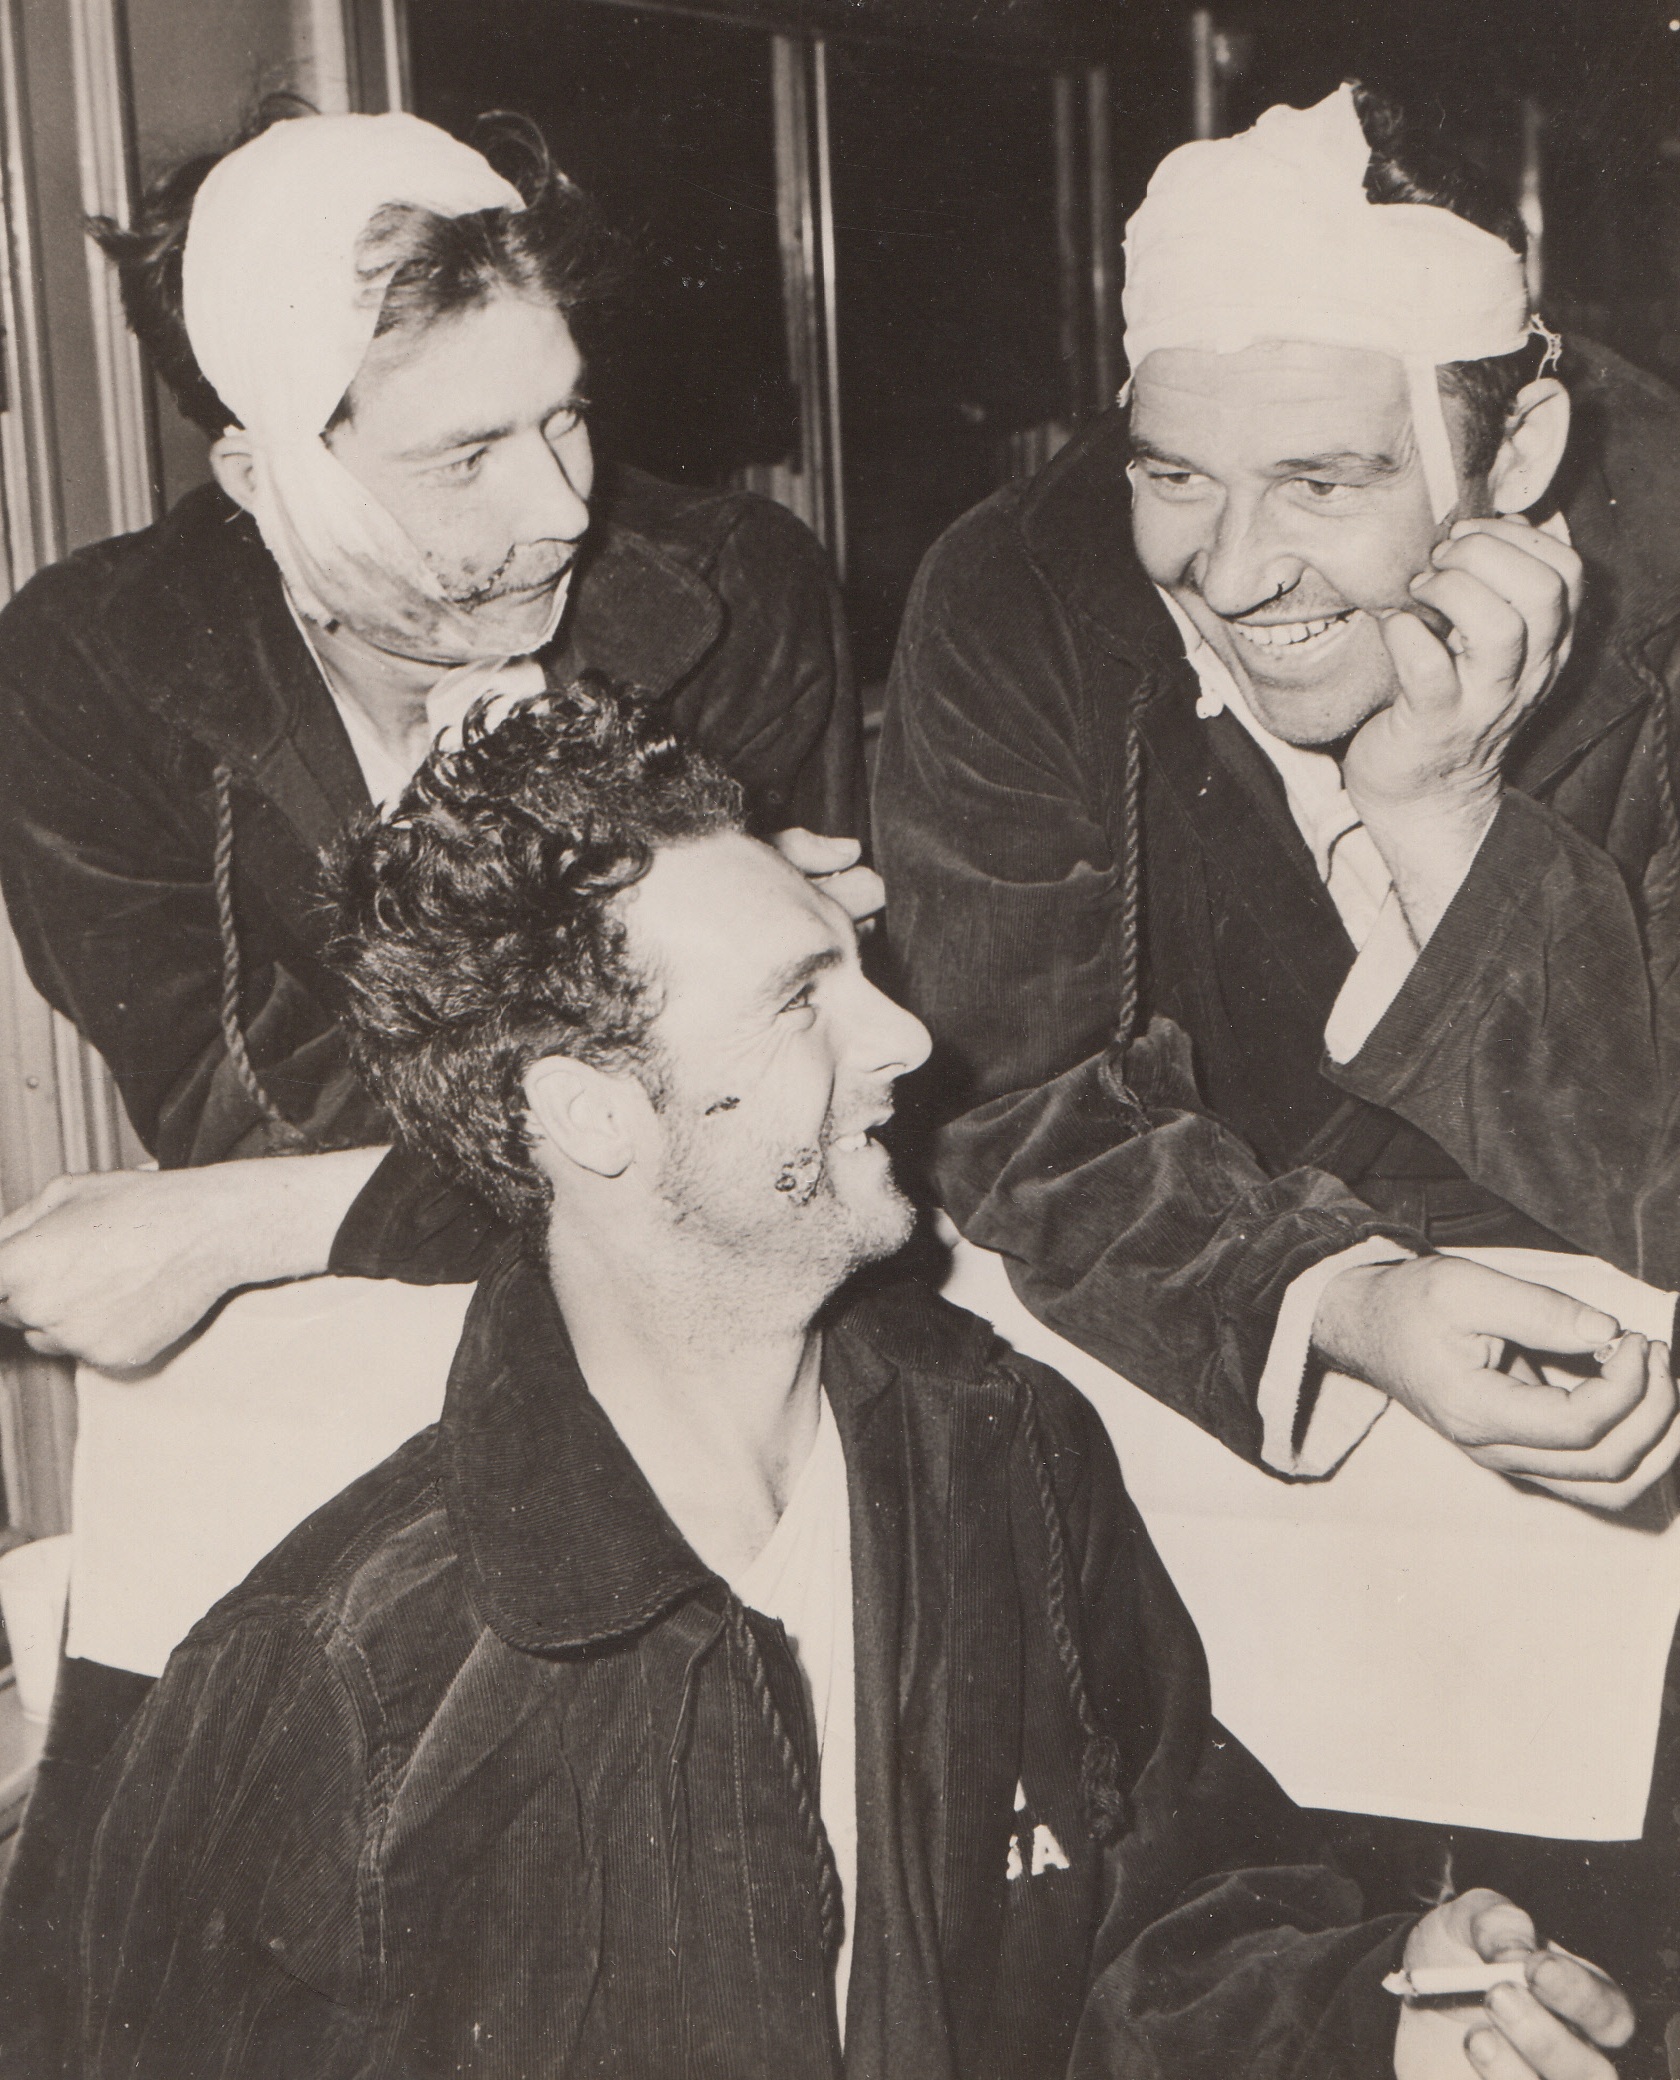 Three Attu Musketeers, 6/6/1943. Seattle, Wash. – Aboard an Army hospital train, these three soldiers who are recovering from head wounds caused by bursting mortar shells, jokingly recall their experiences with the gorilla-like Jap troops on Attu Island, as they are being taken to a Pacific Northwest Army hospital to recover. They are Sgt. J.R. Allison (left rear), Merced, Calif.; Sgt. Lawrence Bradley, Alta Vista, Kan.; and Sgt. Enest Pearce (front) of Murray, Utah. 6/6/43;